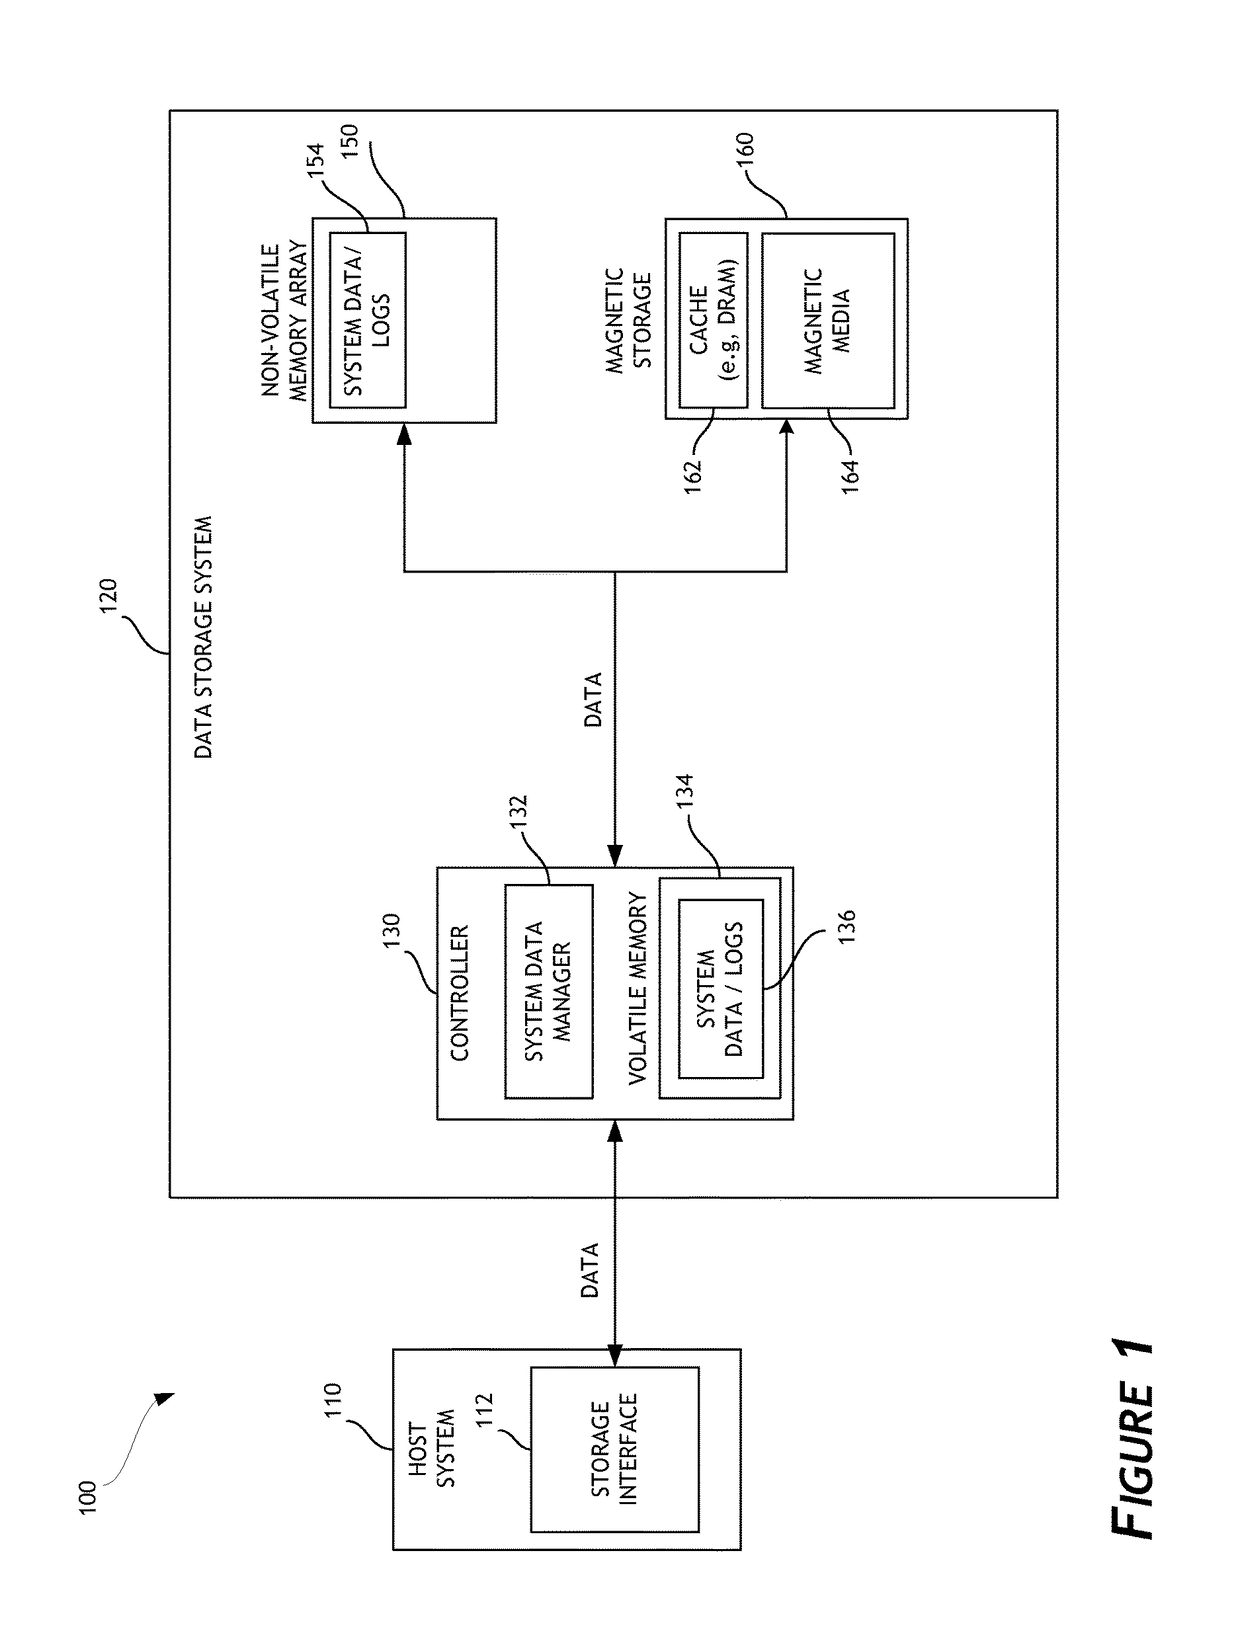 System data management using garbage collection and logs